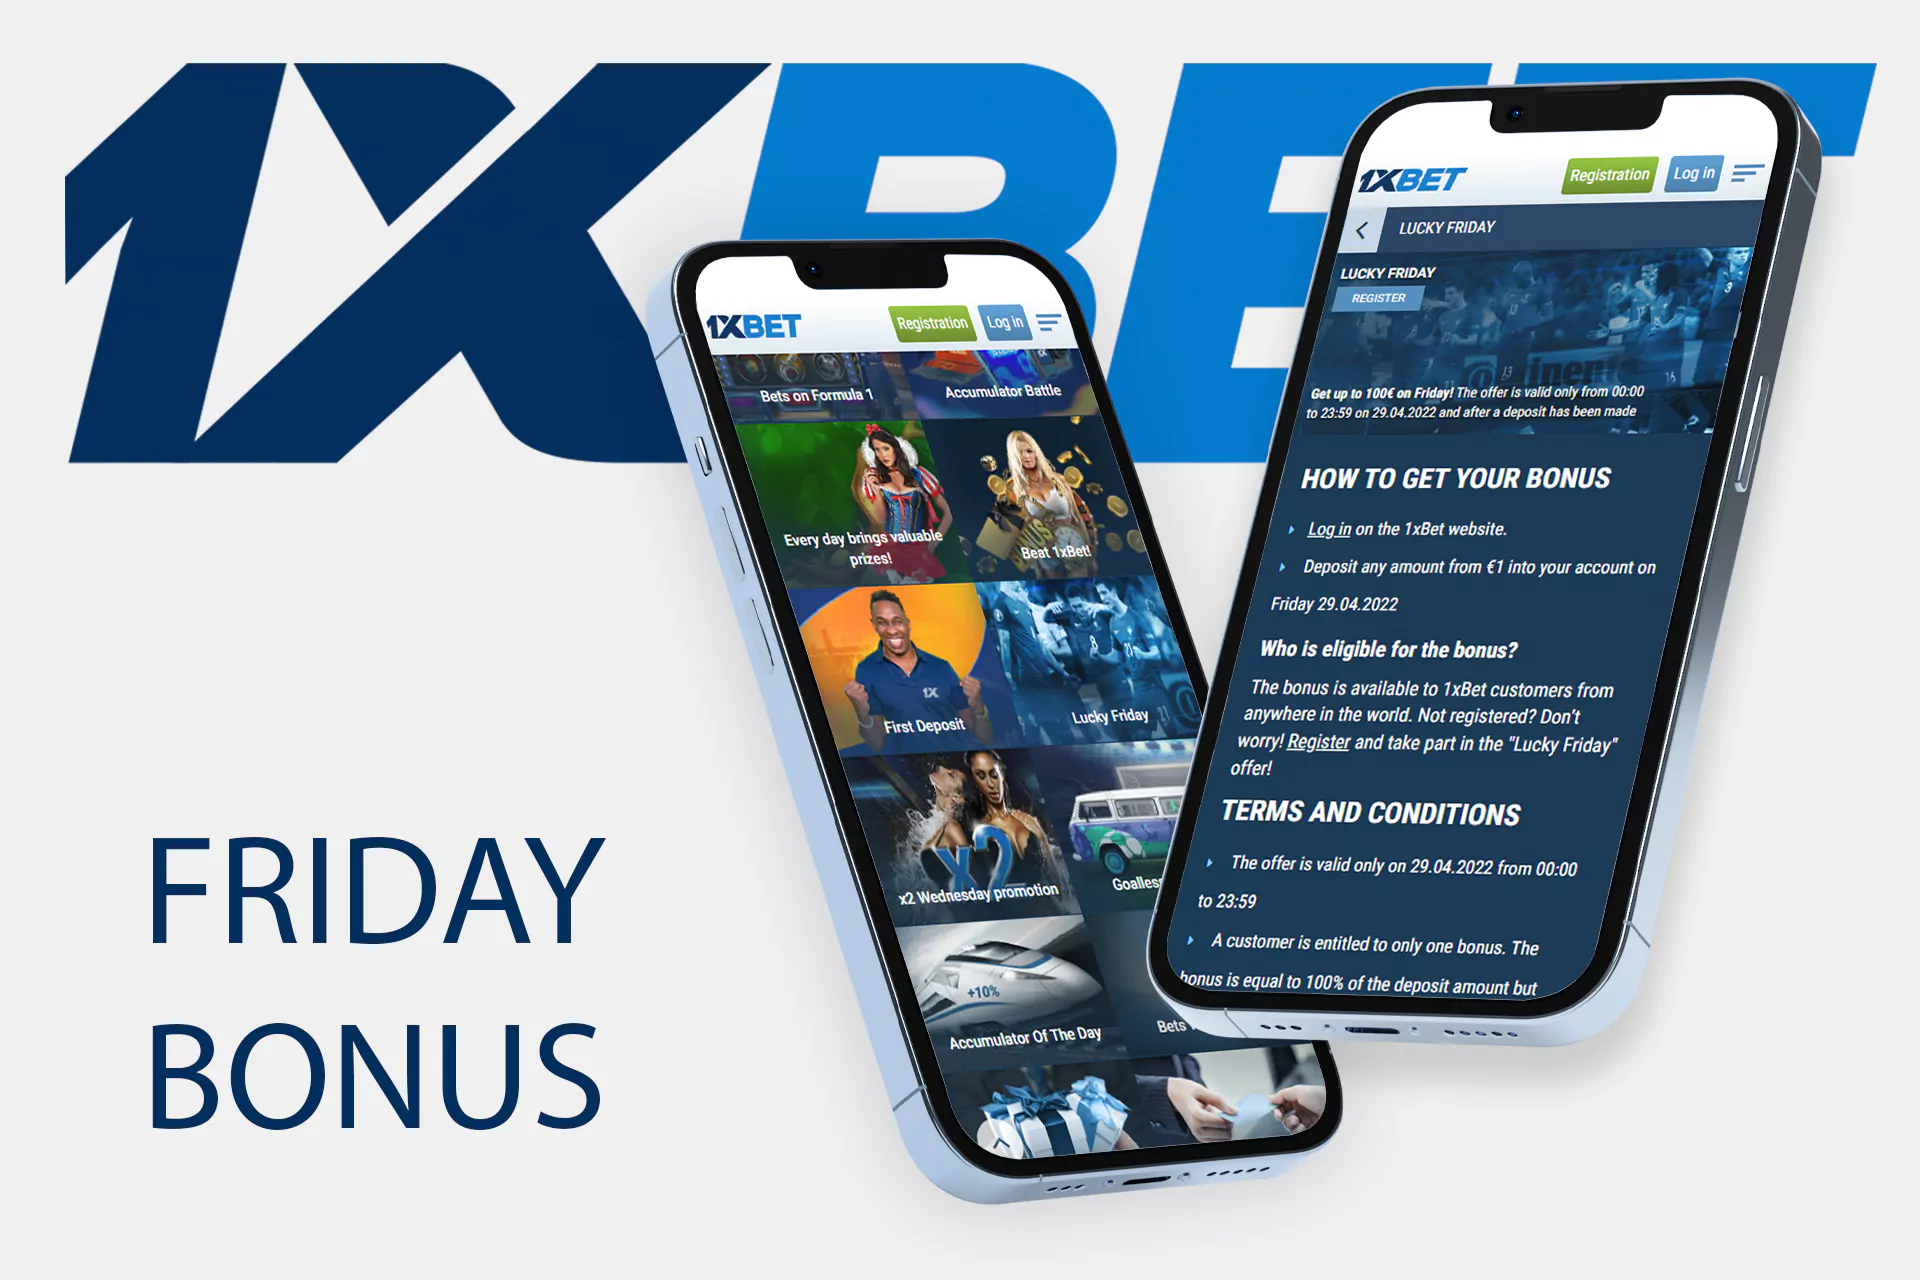 Users of the 1xBet app receive a bonus every Friday.